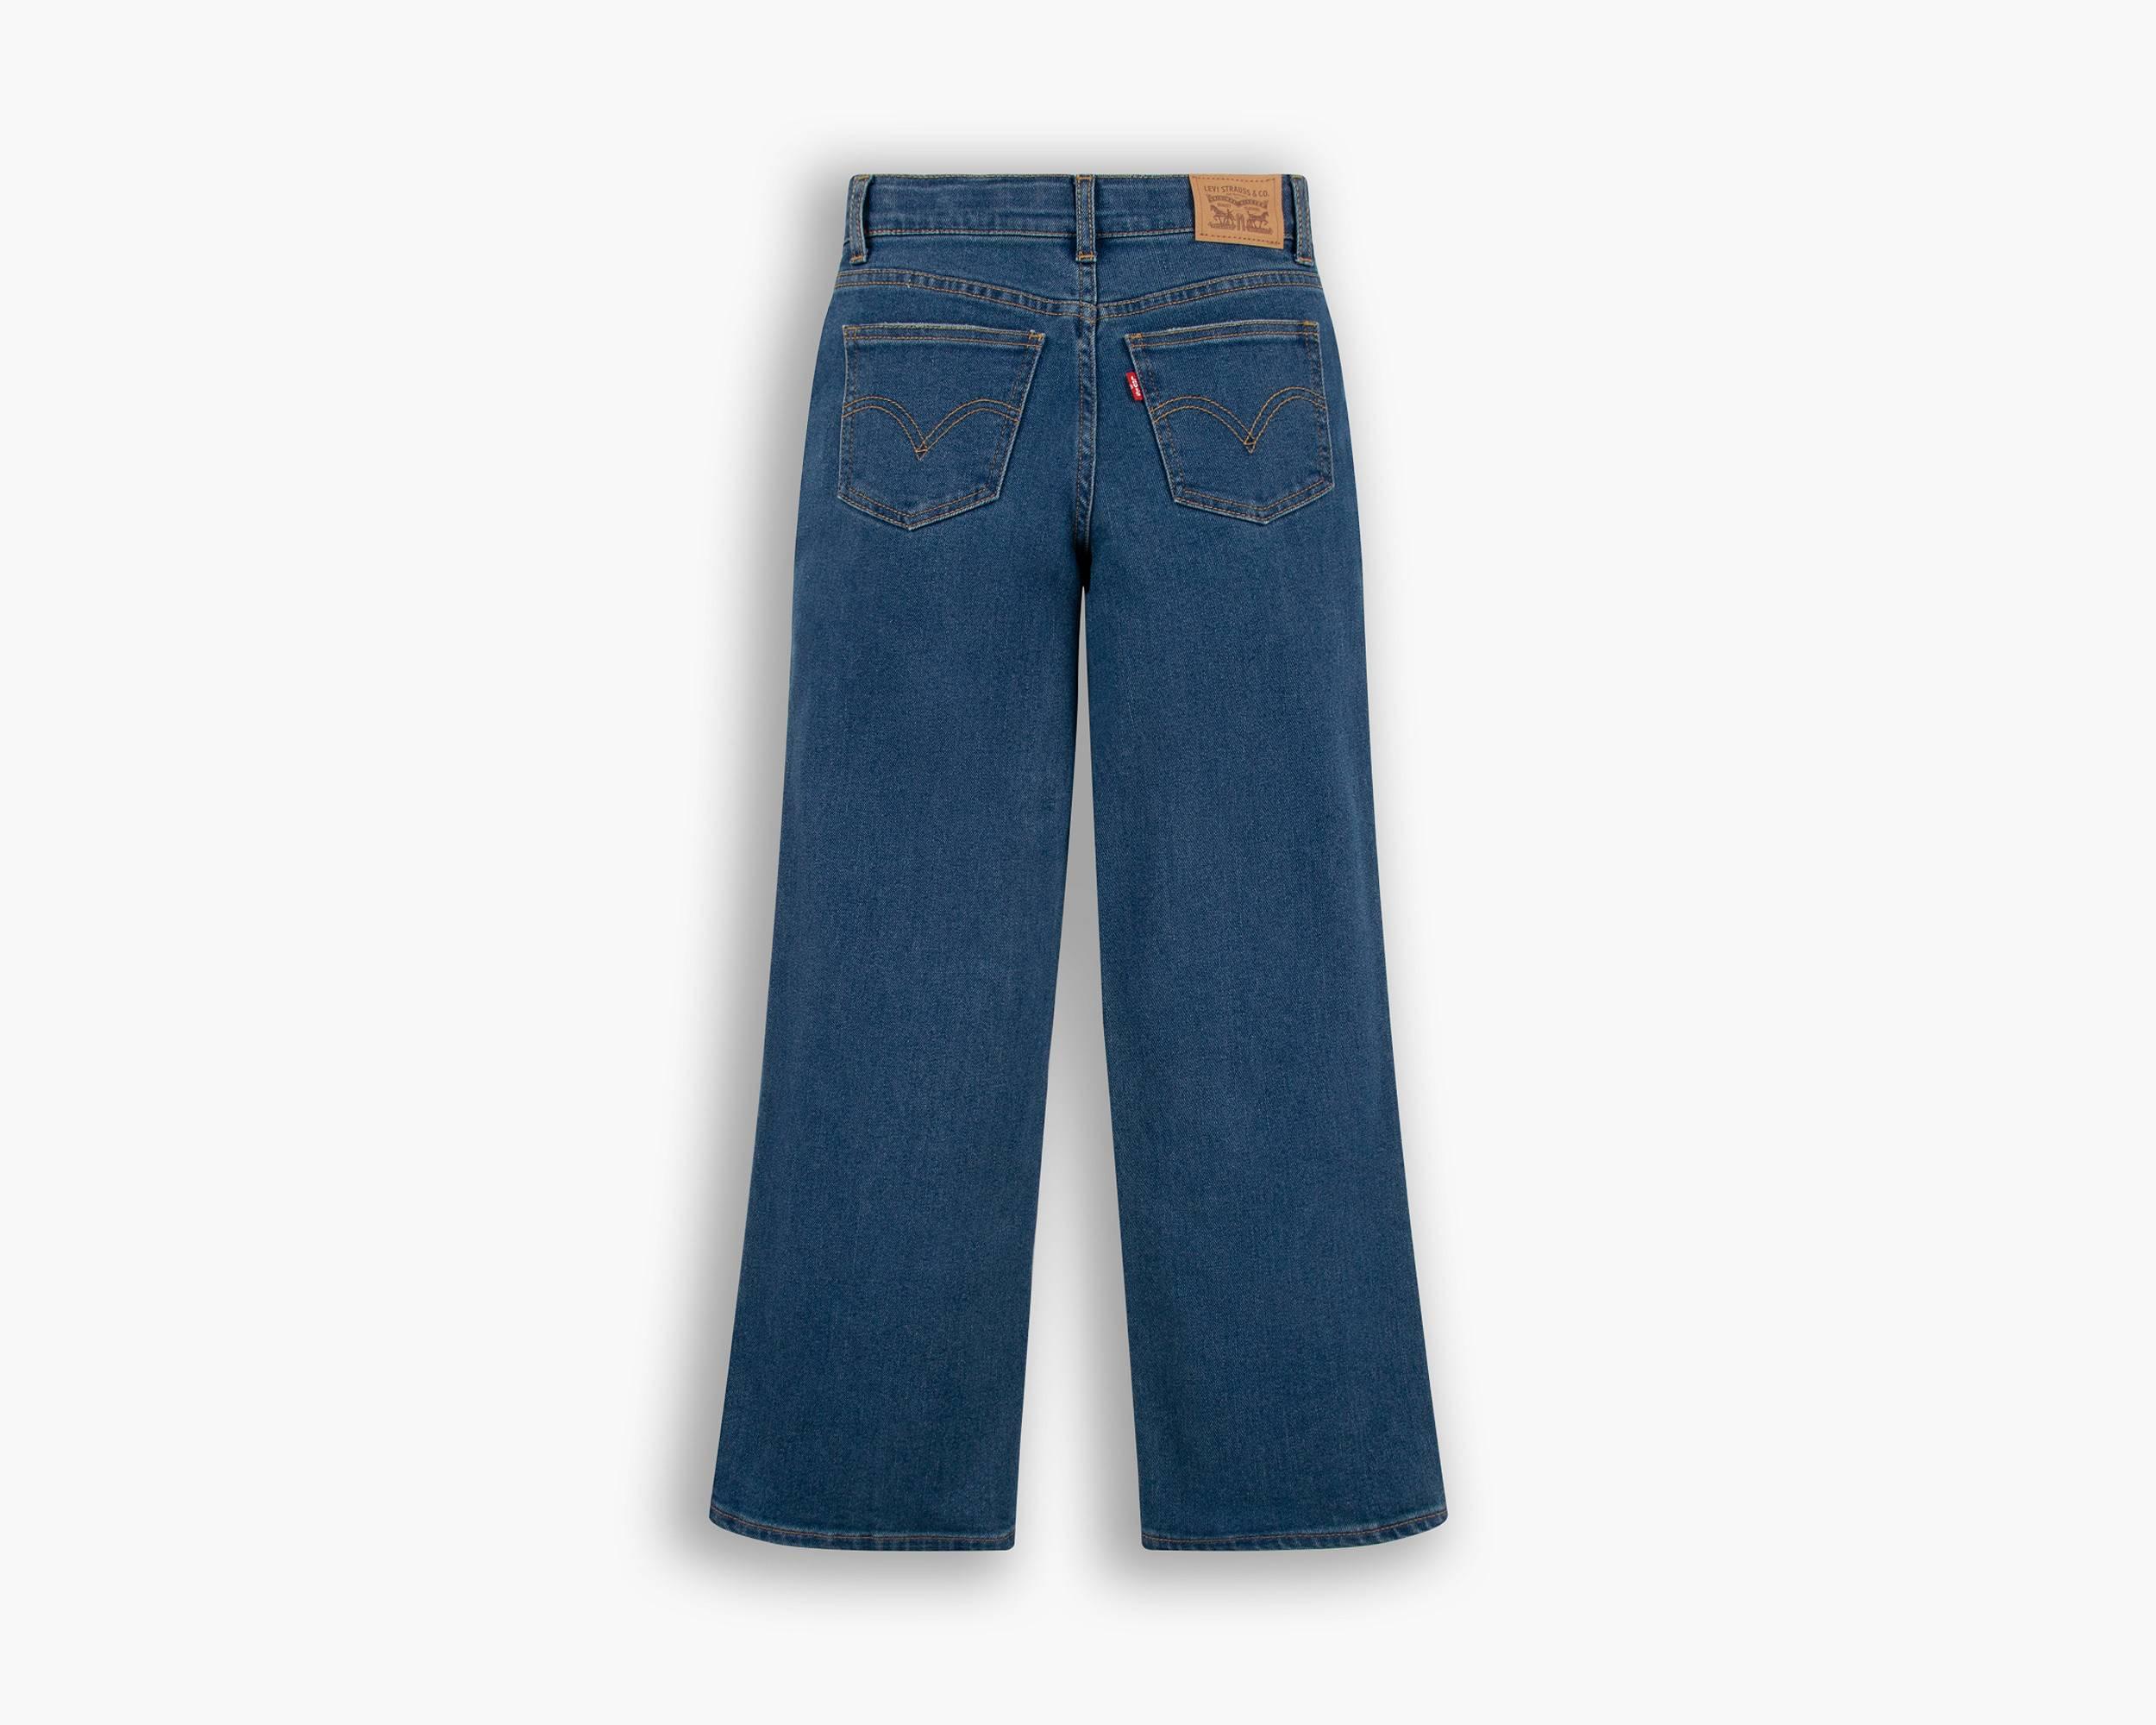 Teenager Wide Leg Jeans - Levi's Jeans, Jackets & Clothing